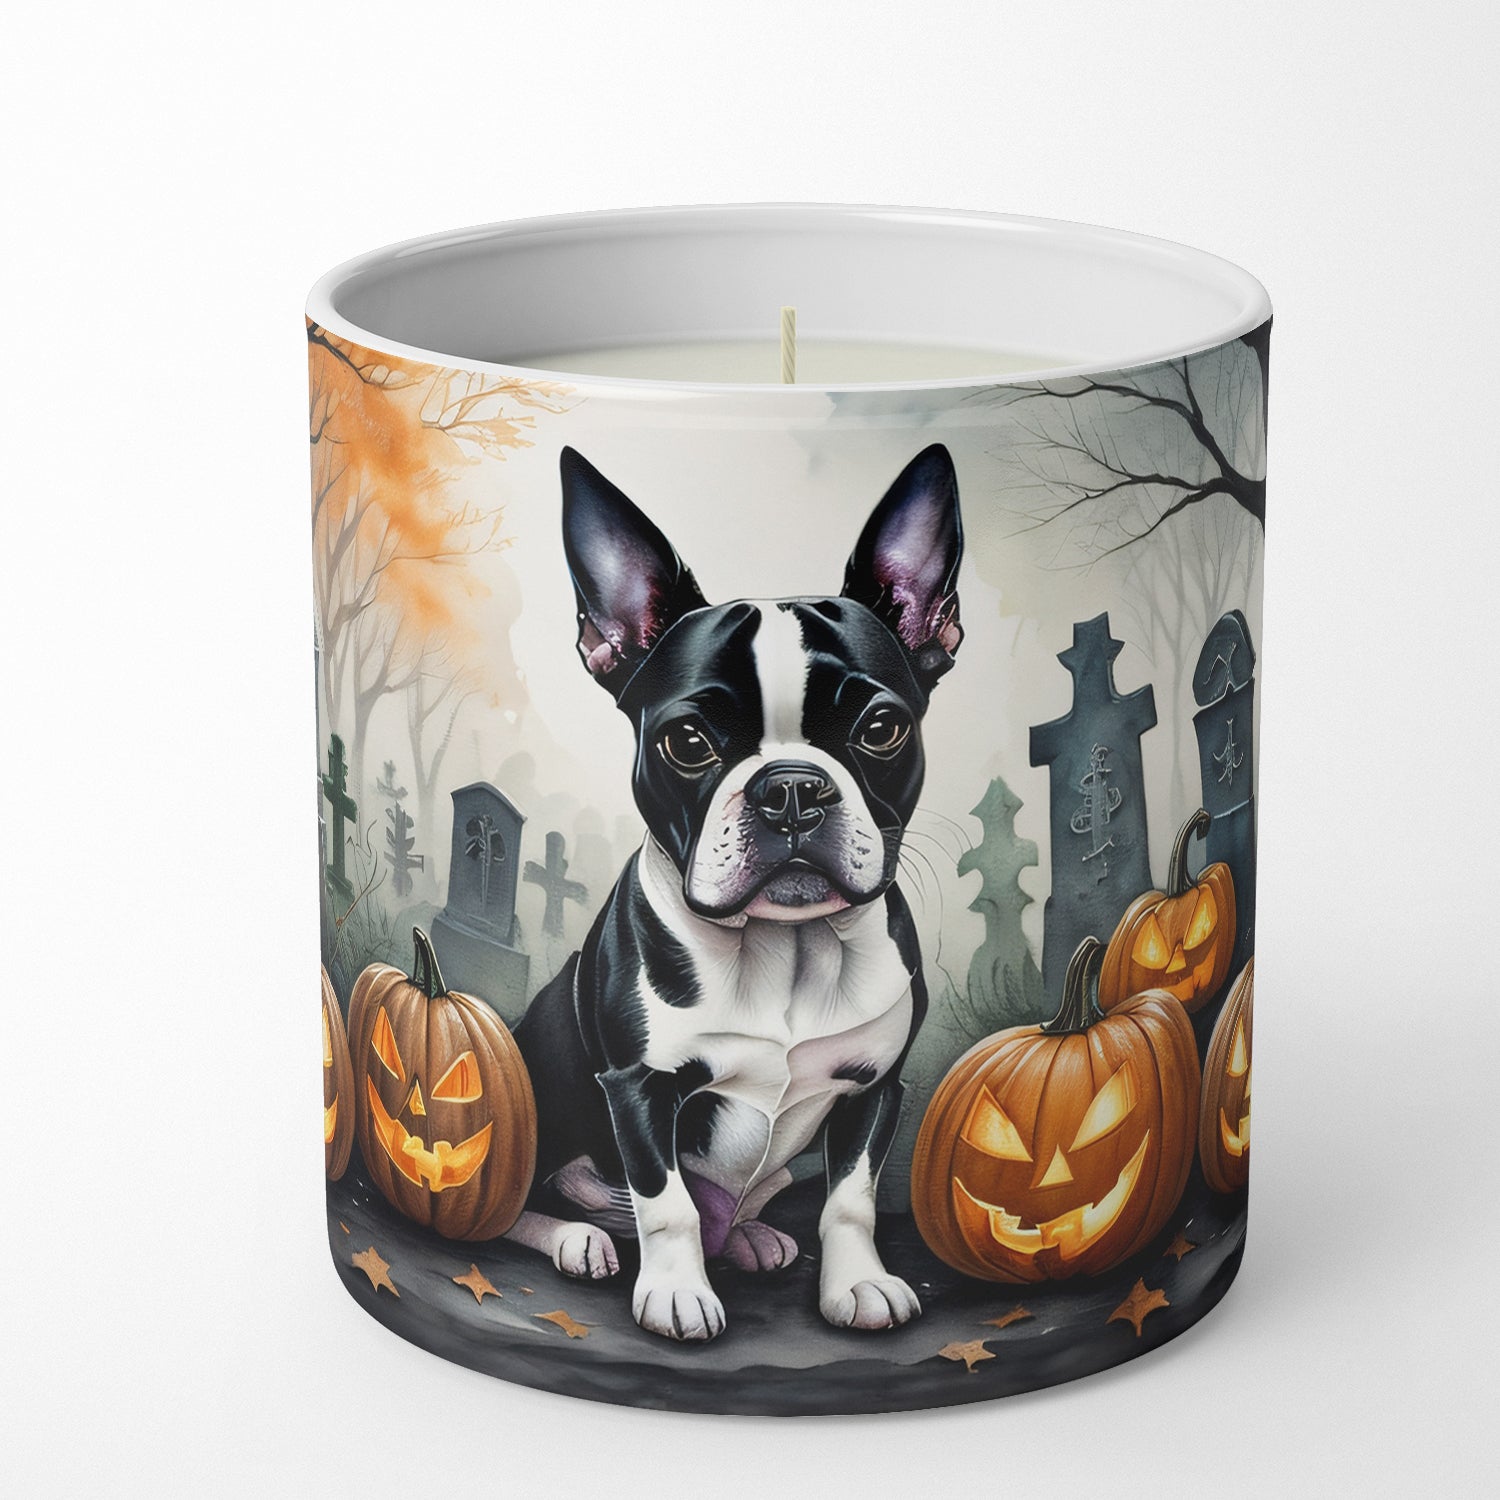 Buy this Boston Terrier Spooky Halloween Decorative Soy Candle